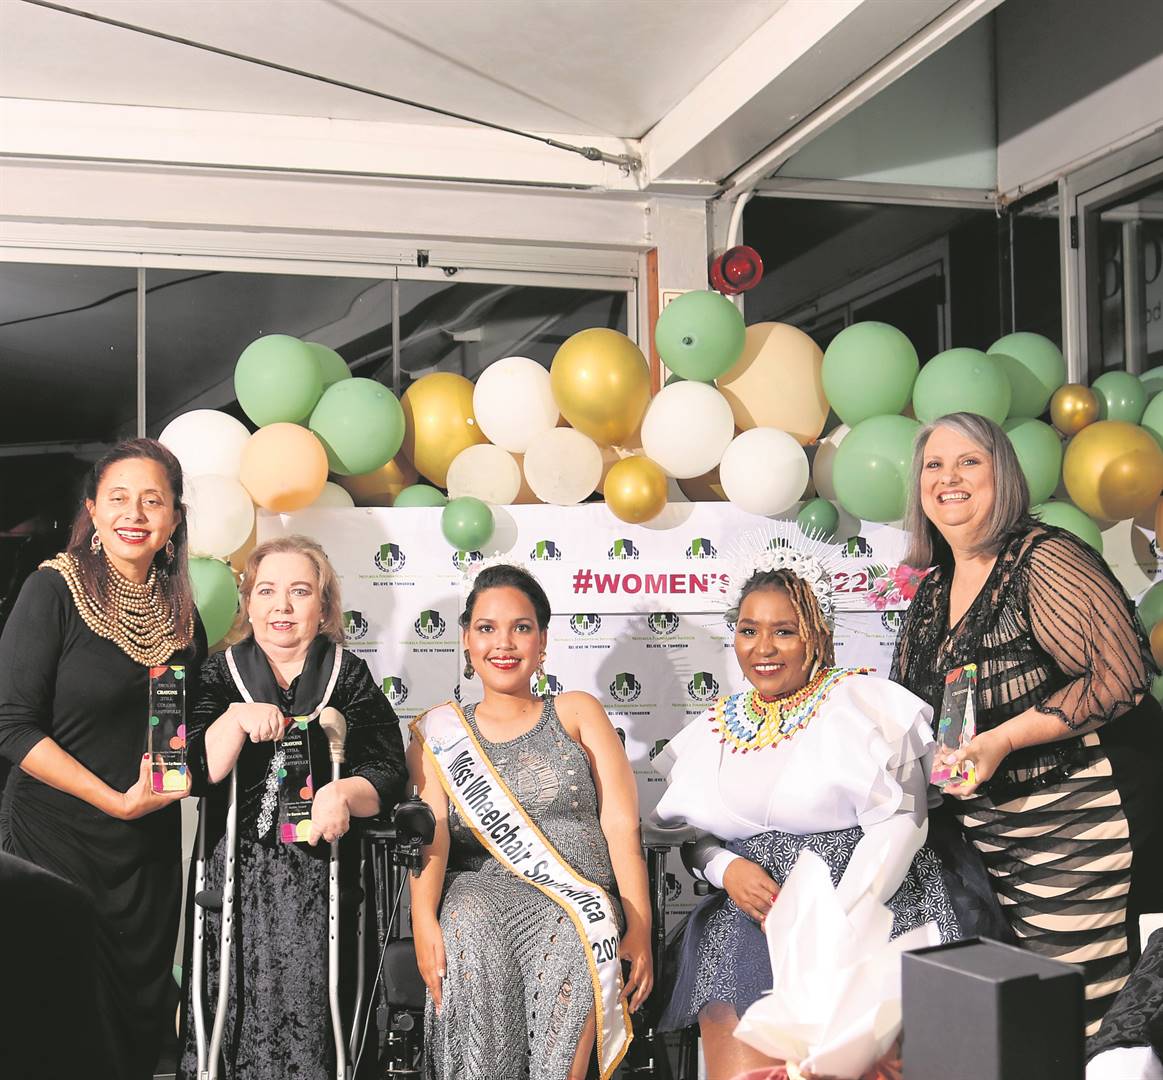 The Broken Crayons Still Colour Beautifully Symposium celebrated women with disabilities. From left Marlene le Roux, Karen Smit, Tamelyn Bock (Miss Wheelchair South Africa 2021), Nokutela Makohliso (NFI founder) and Lydia Pretorius.PHOTO: supplied